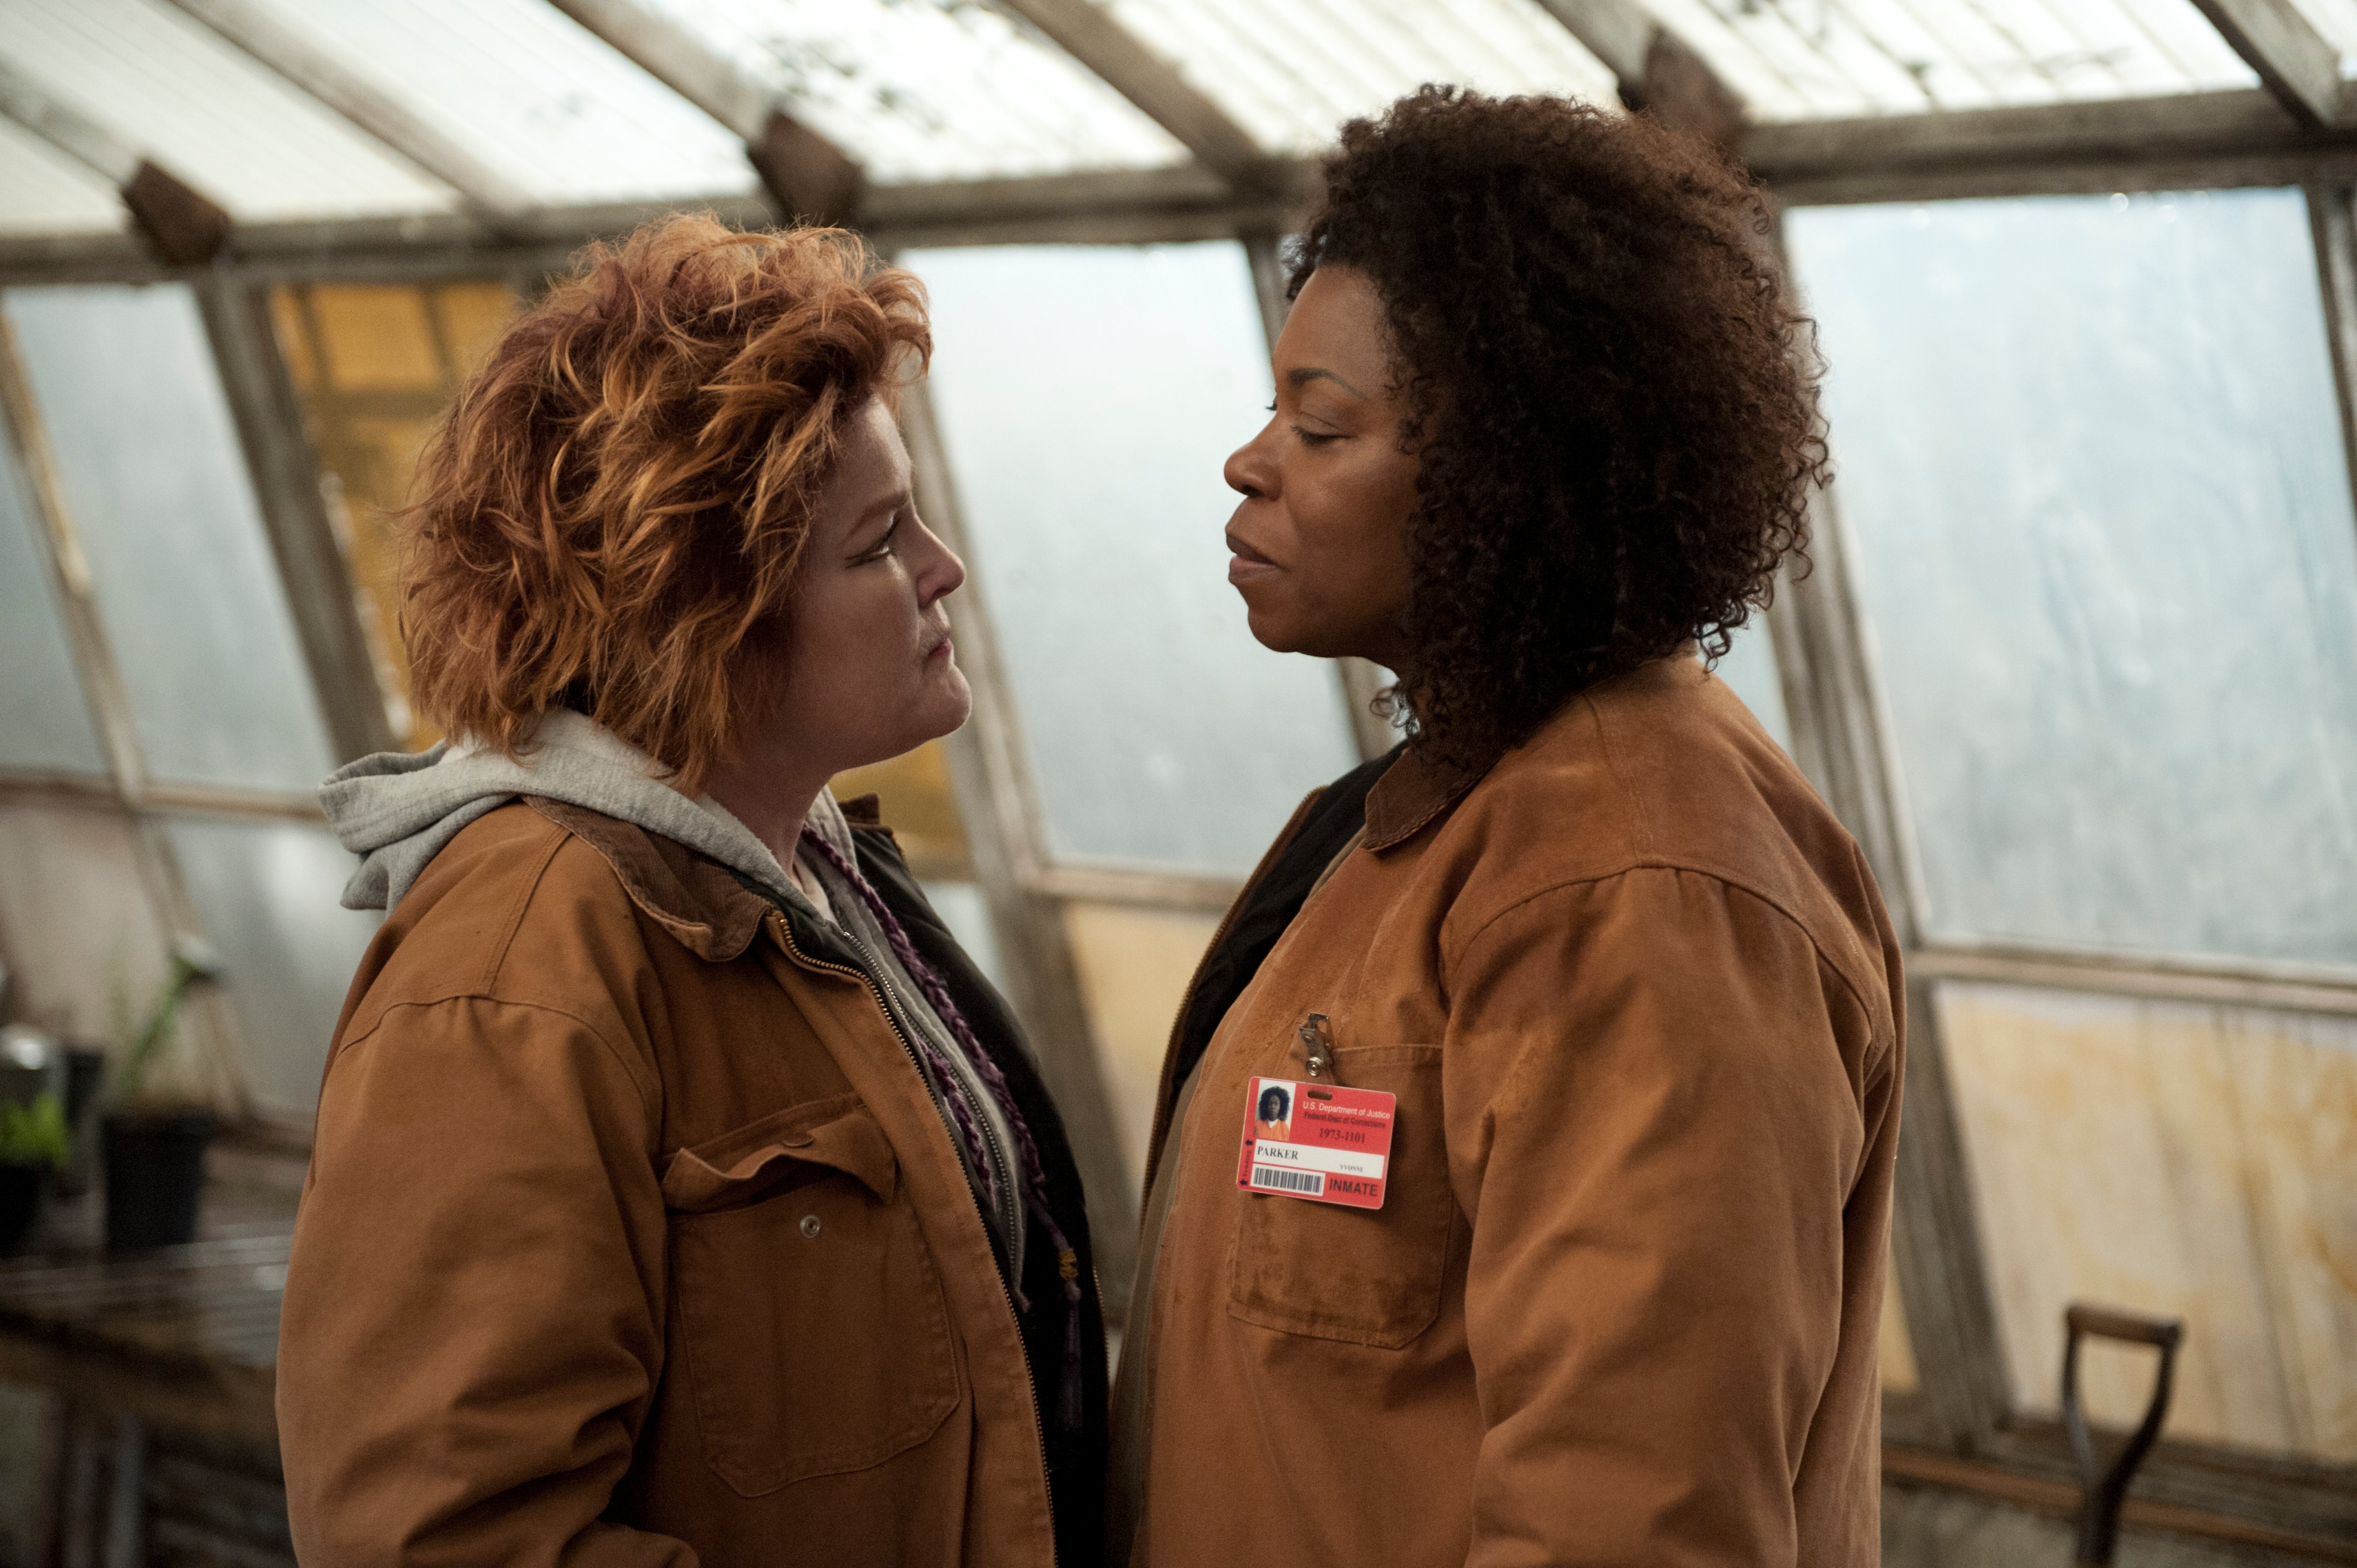 Kate Mulgrew (L) and Lorraine Toussaint (R) in a scene from Netflix's Orange is the New Black (JOJO WHILDEN)